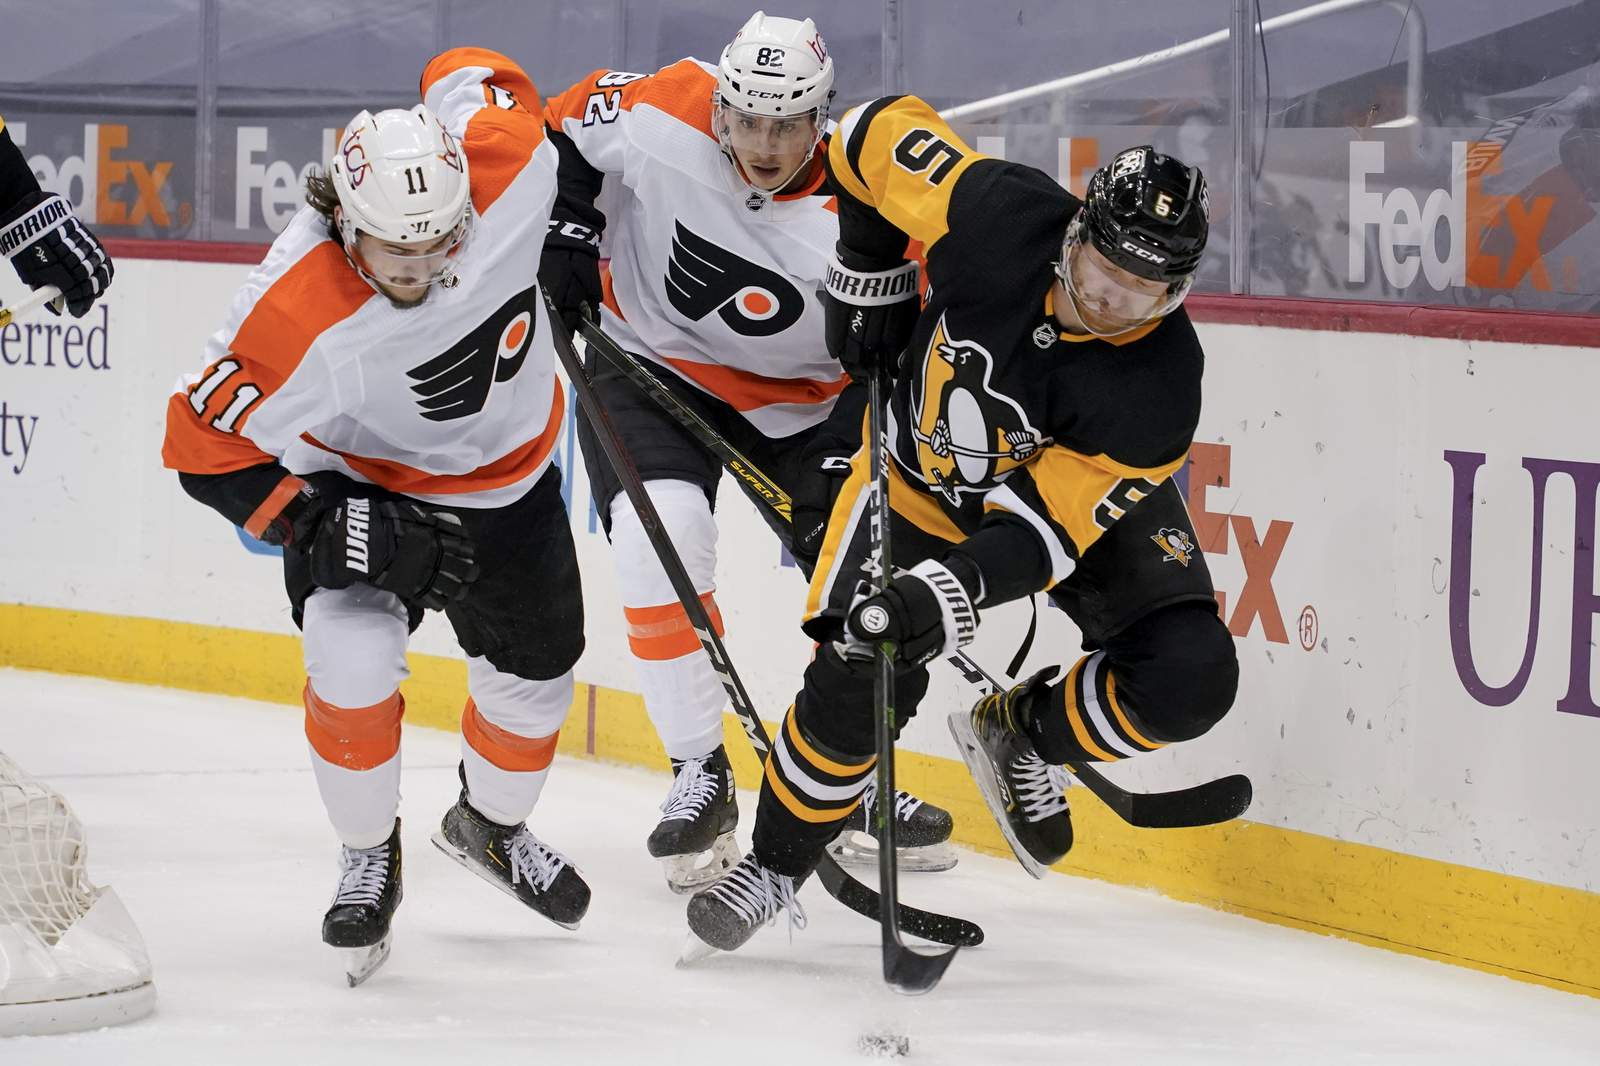 Kapanen scores twice; Pens welcome back fans with 5-2 win